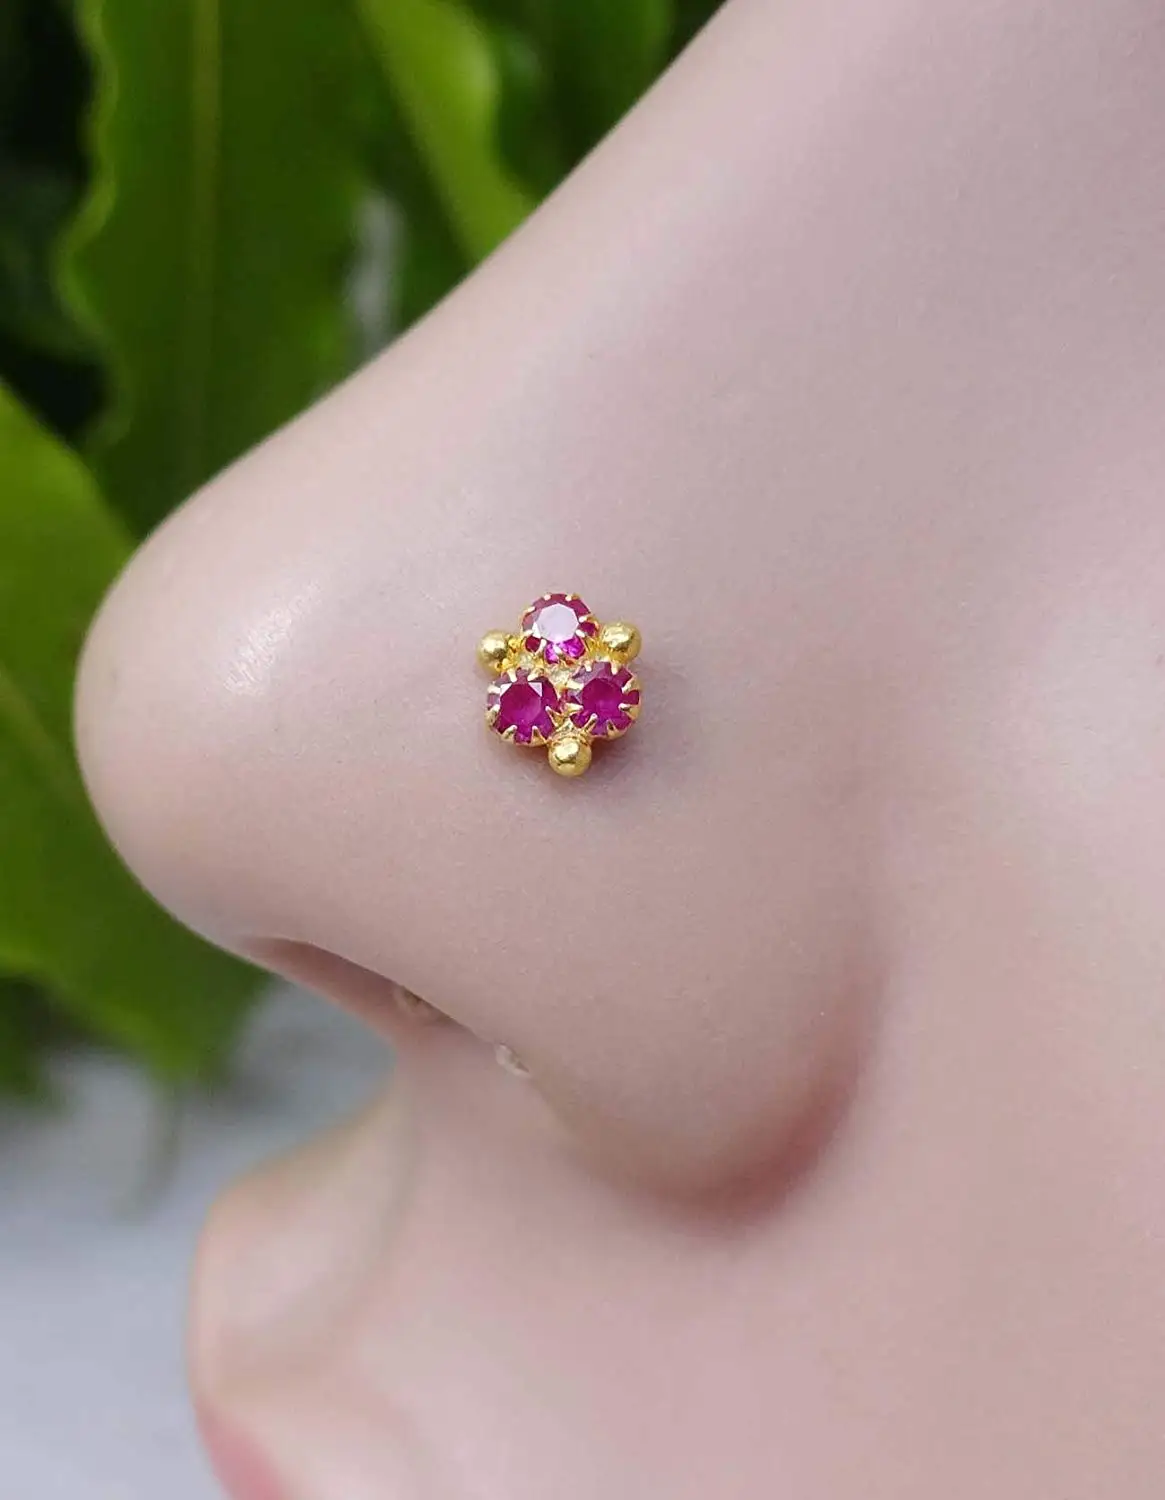 Buy Gold Nose Stud Tiny Nose Stud Small Nose Stud Tribal